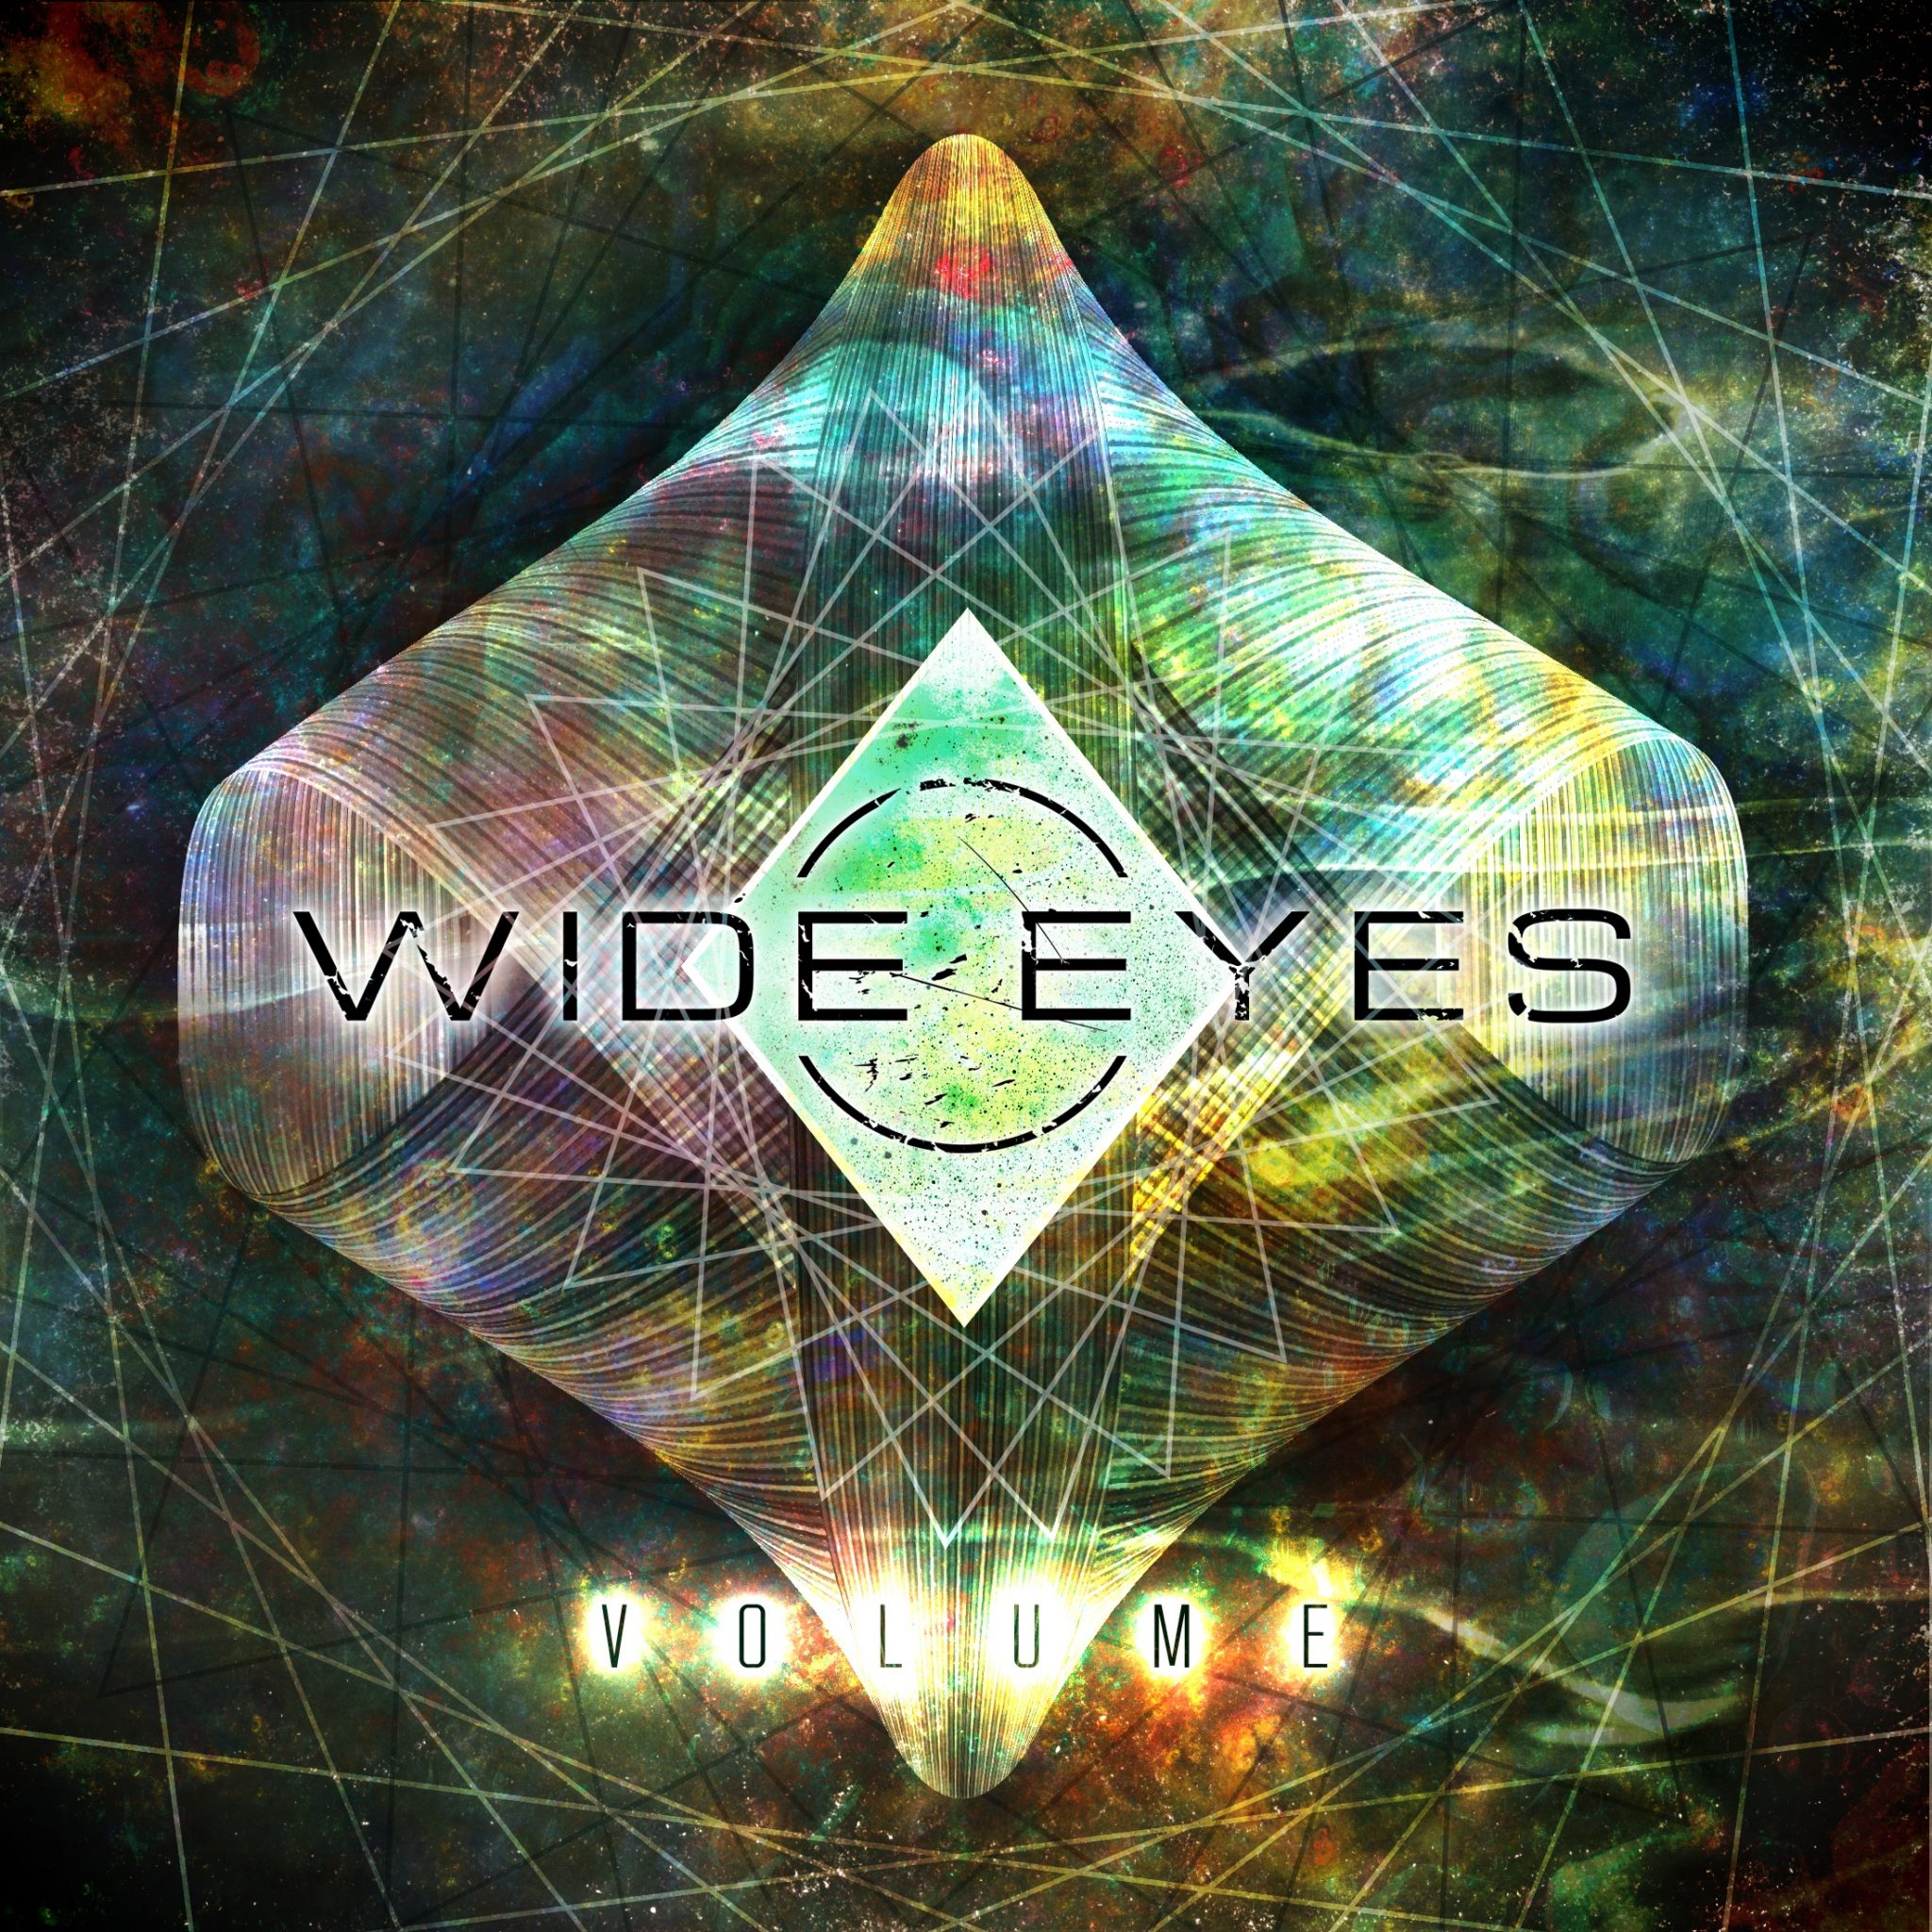 News Added Aug 21, 2012 Really awesome progressive metal/djent band. It's instrumental, really epic. Submitted By Nii Track list: Added Aug 21, 2012 1. Inception 2. Genie 3. Hah! 4. Sighborg 5. Eskalofrio 6. Higher 7. Diamondize 8. Immortalize 9. Champagne Charlie 10. Decimator 11. Terra Tellus 12. The Galveston Key 13. Uno 14. Slipt […]